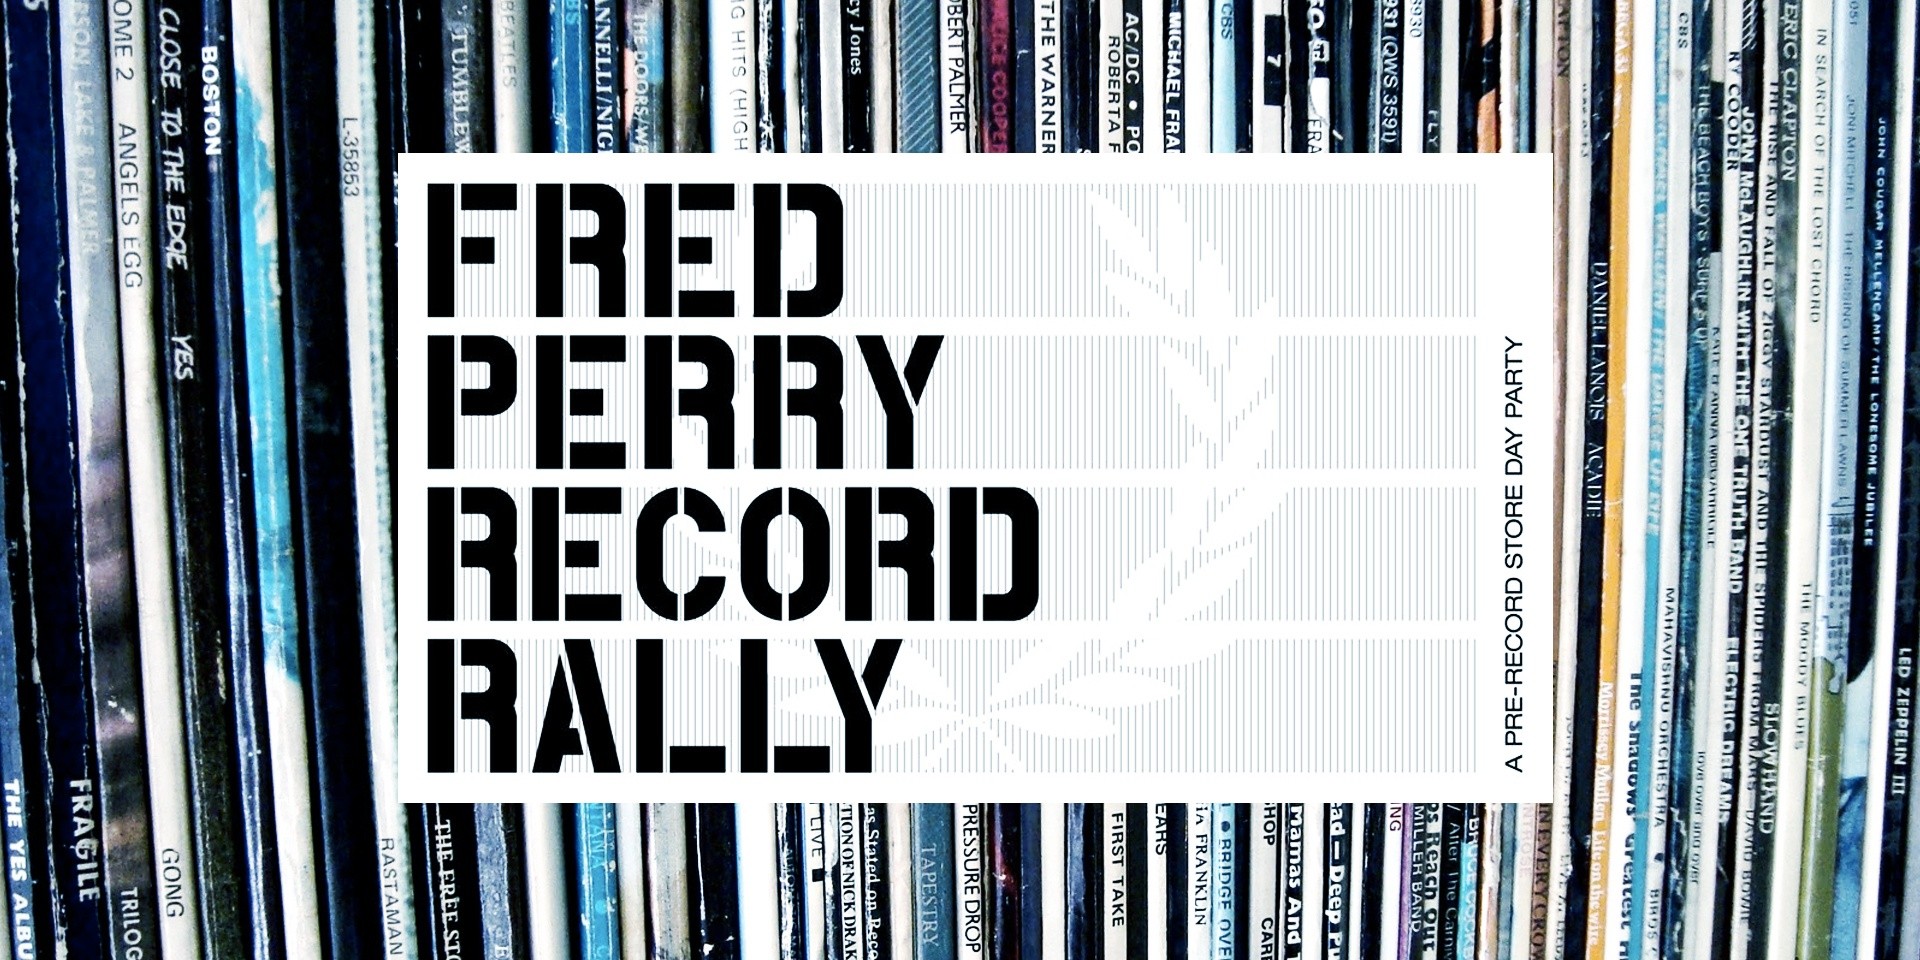 Fred Perry Record Rally promises crate-digging fun at Chye Seng Huat Hardware